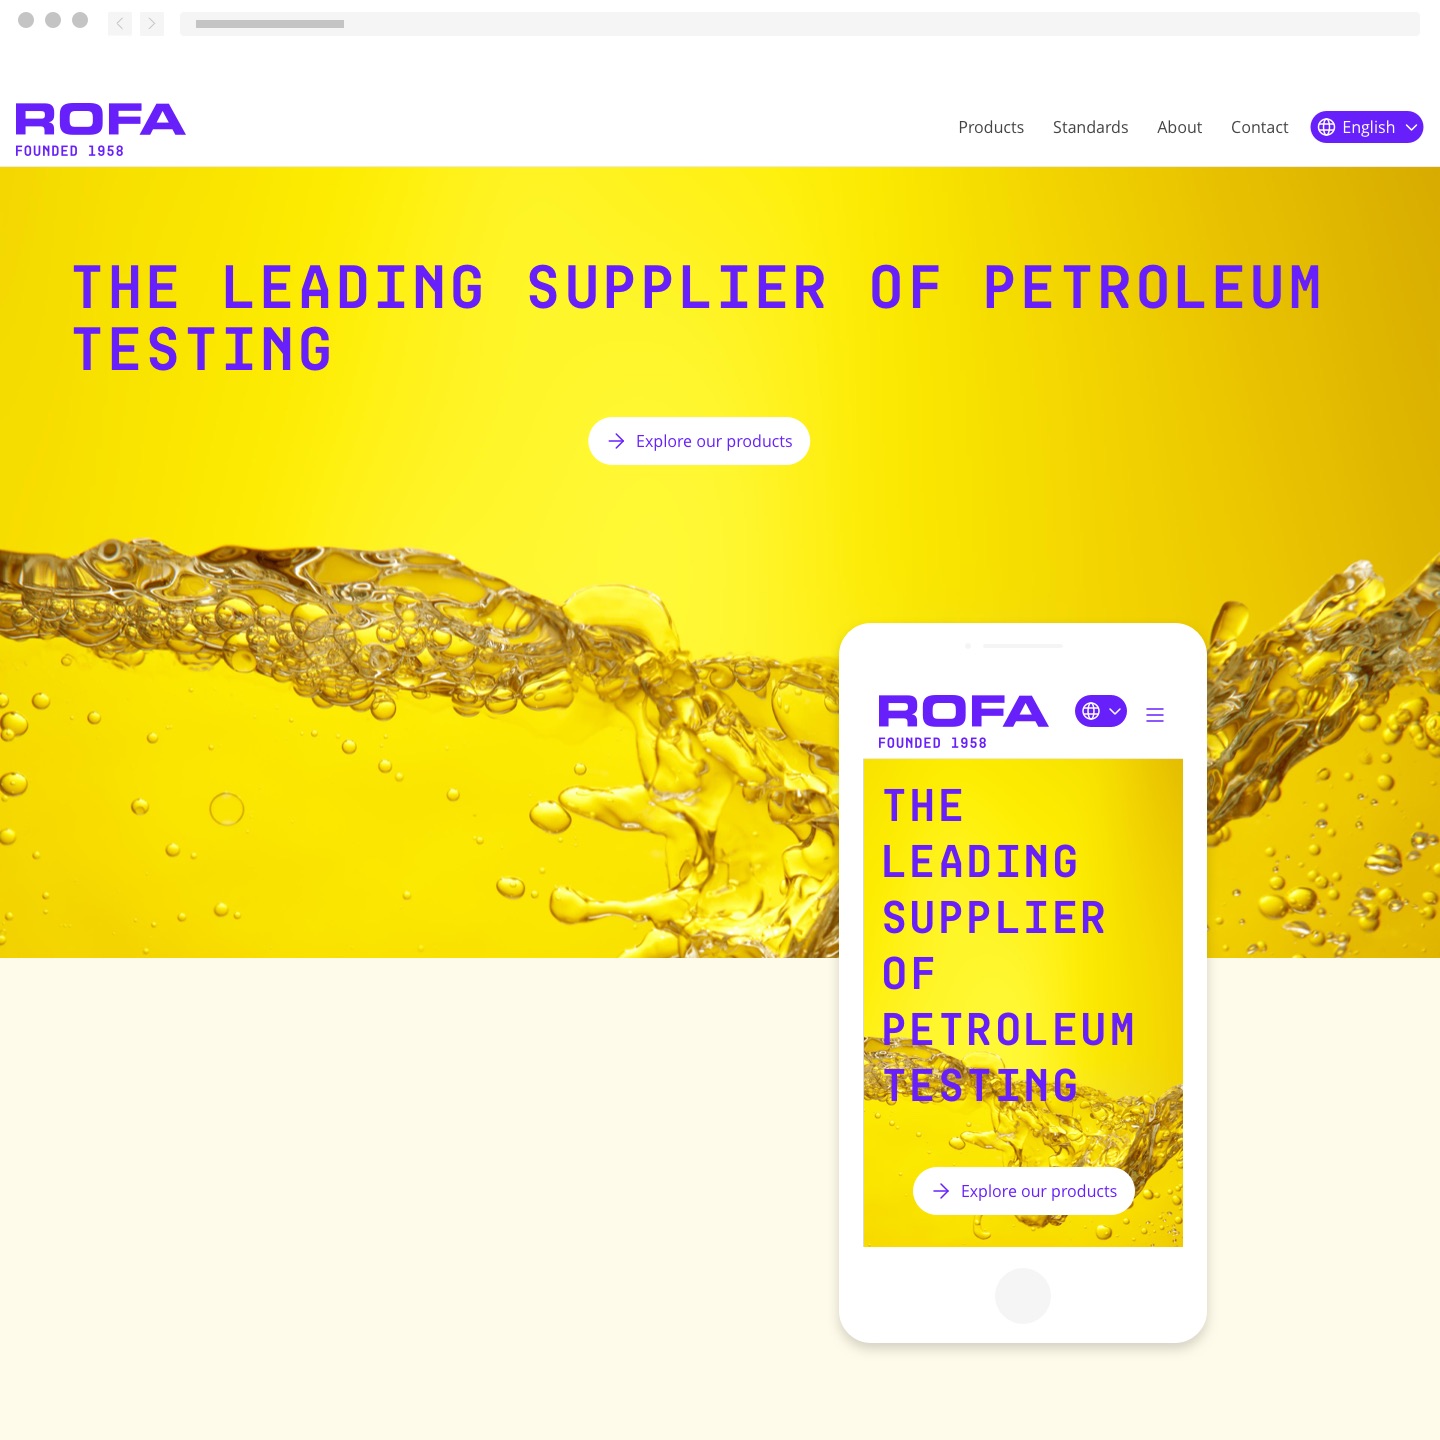 Webdesign of the homepage of rofa.at